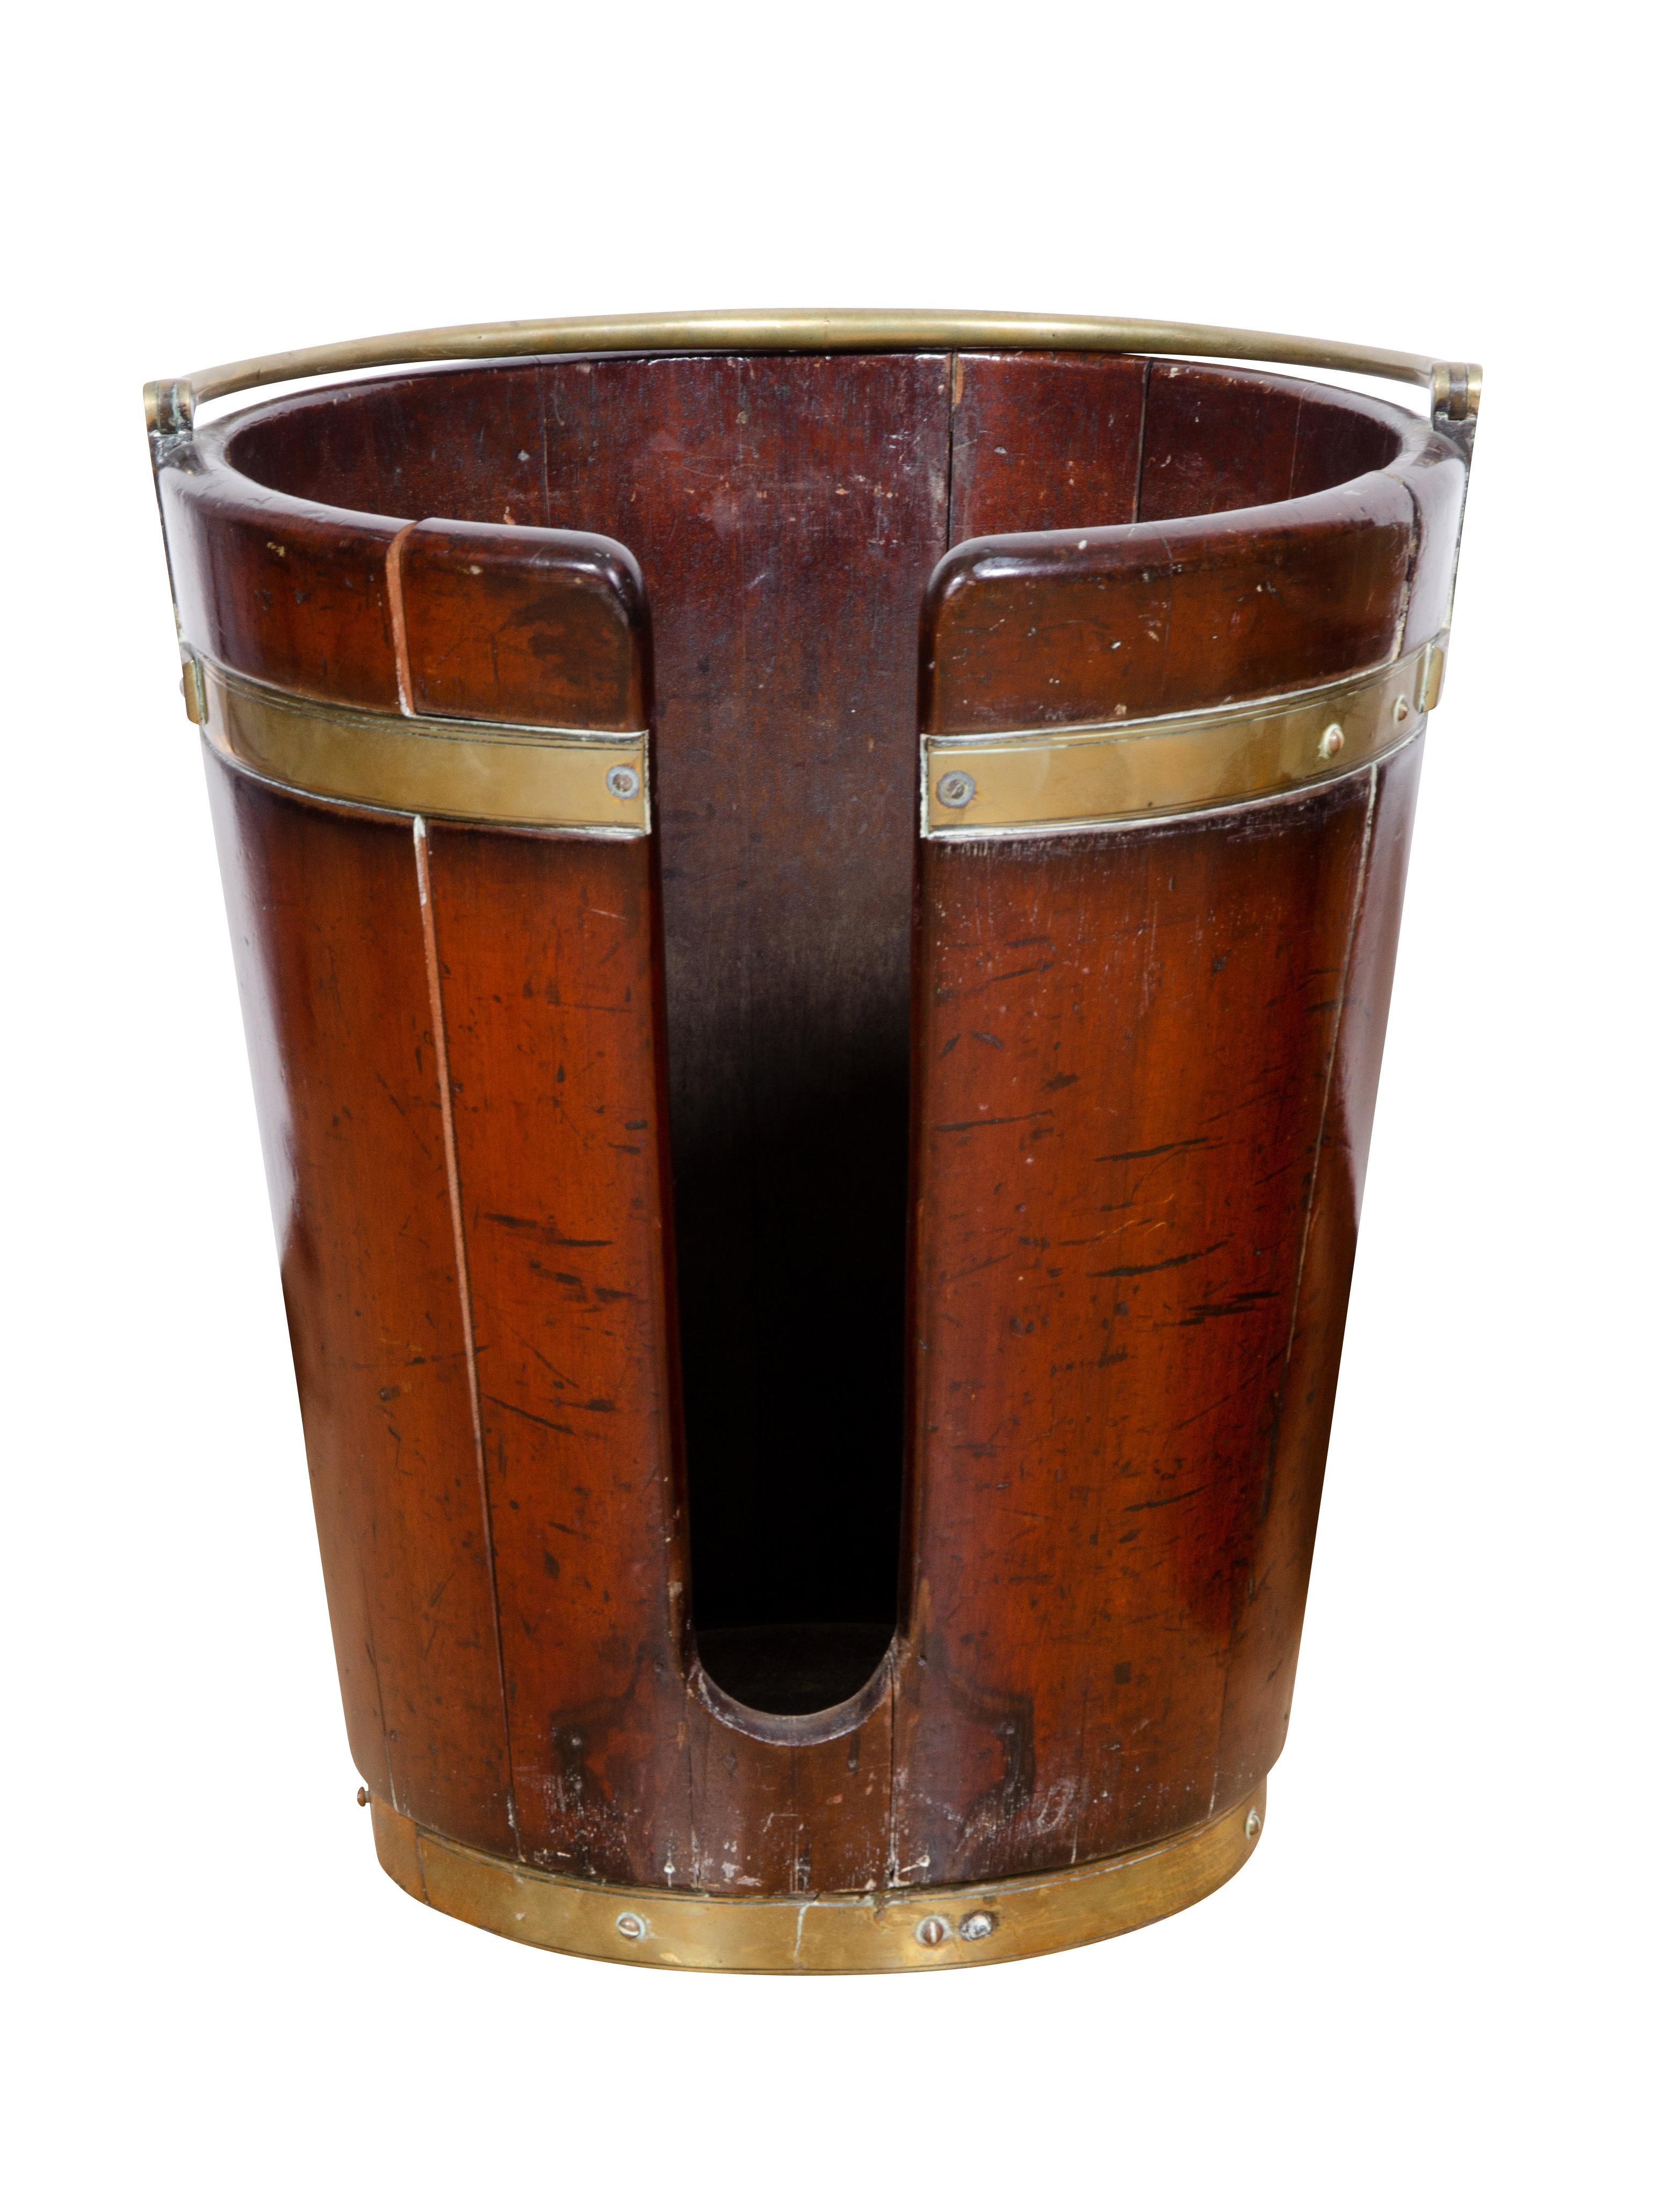 Pair of Regency Mahogany and Brass Bound Peat Buckets For Sale 6